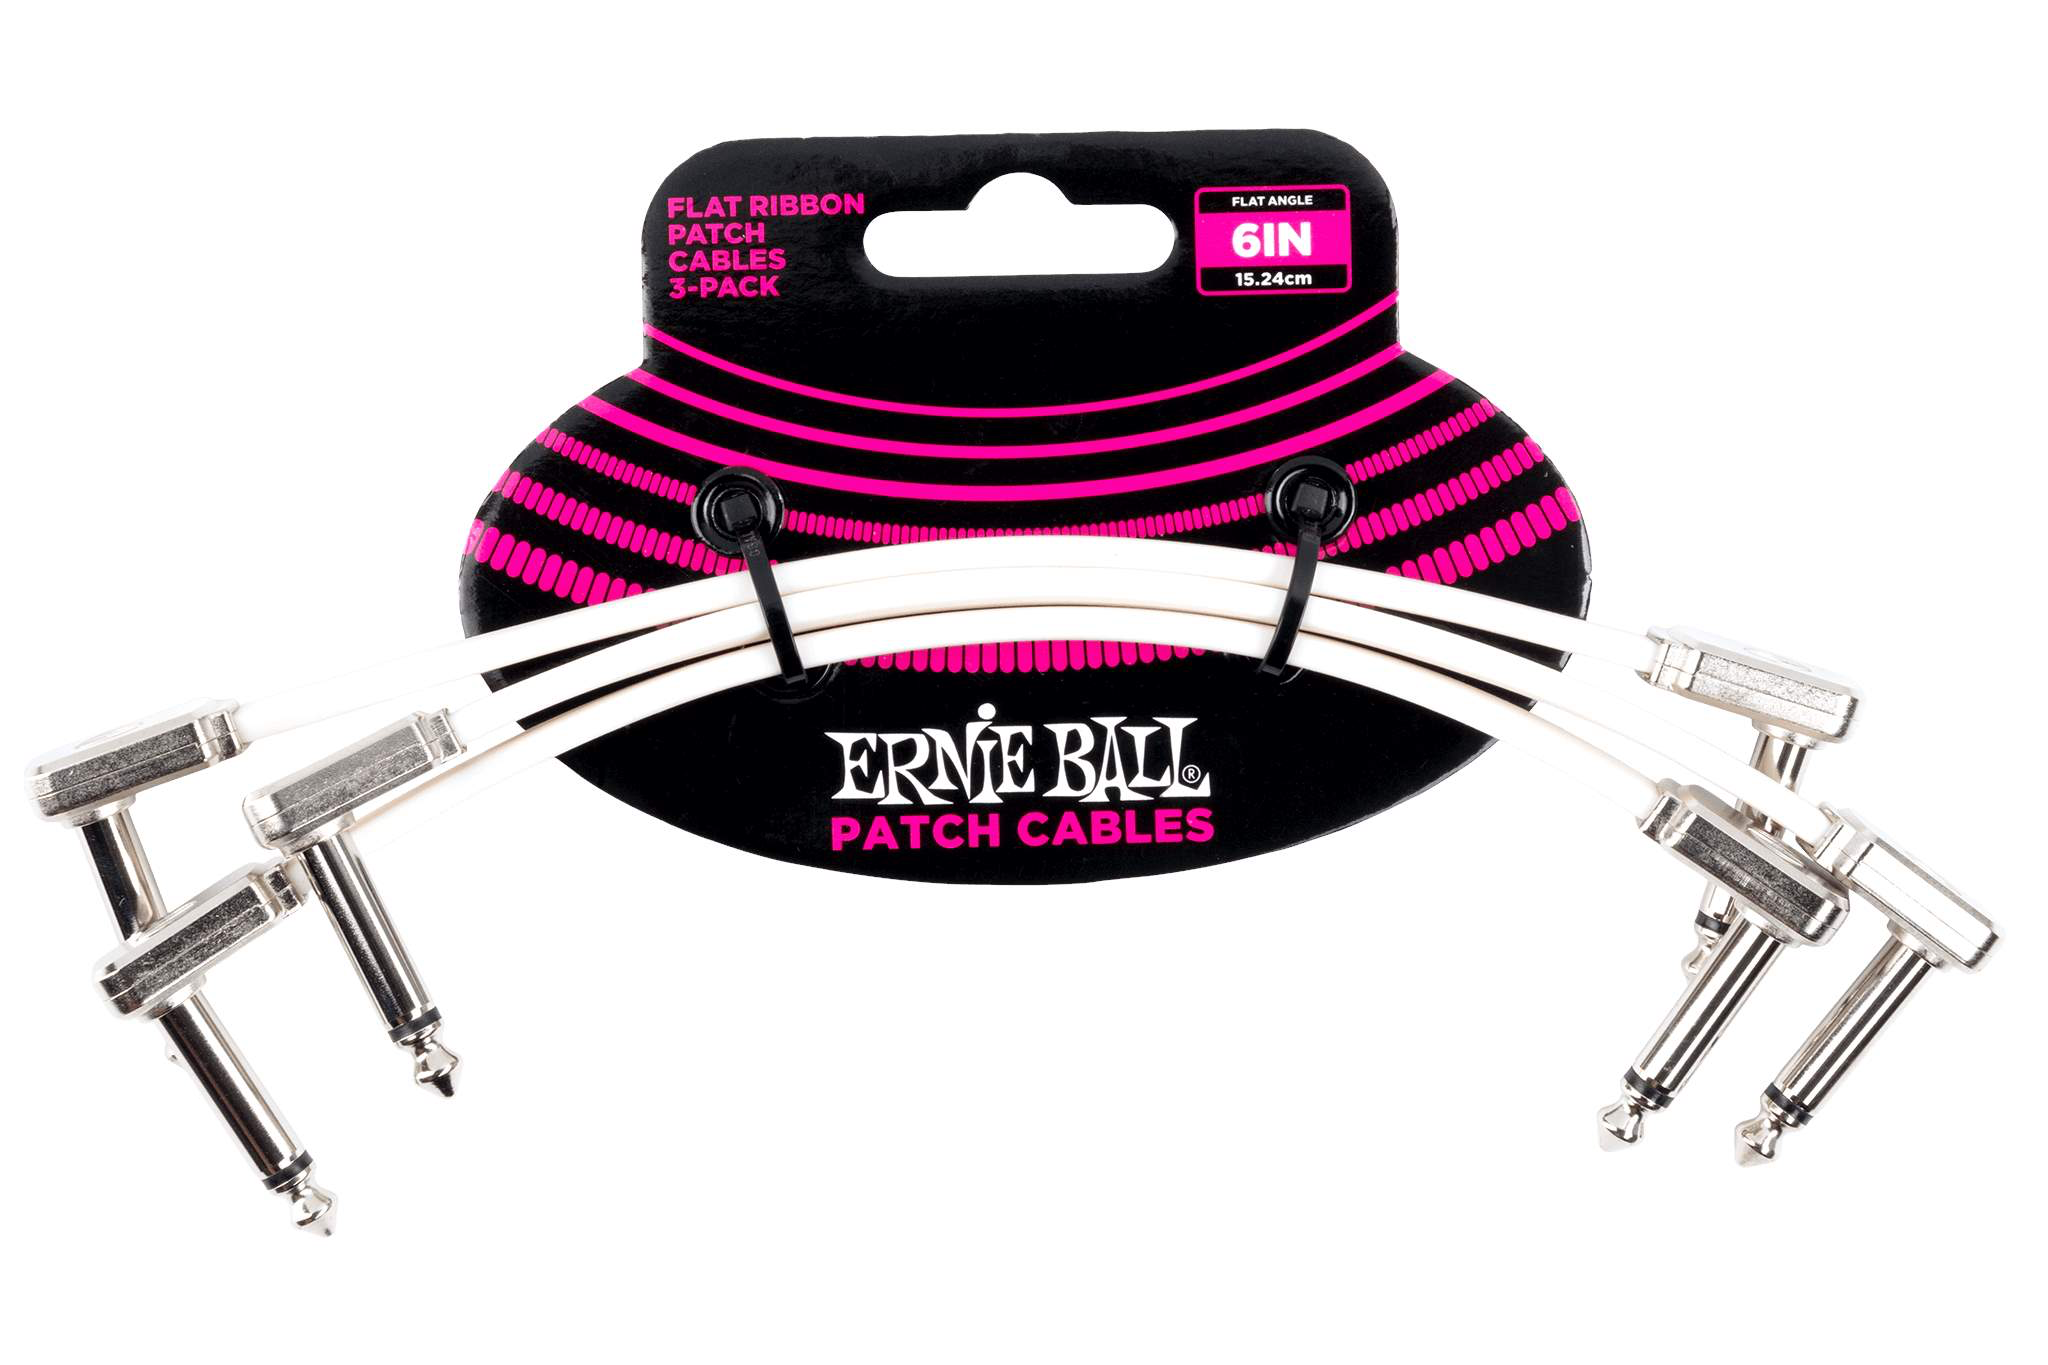 Ernie Ball 6" Flat Ribbon Patch Cable White 3 Pack - WHITE